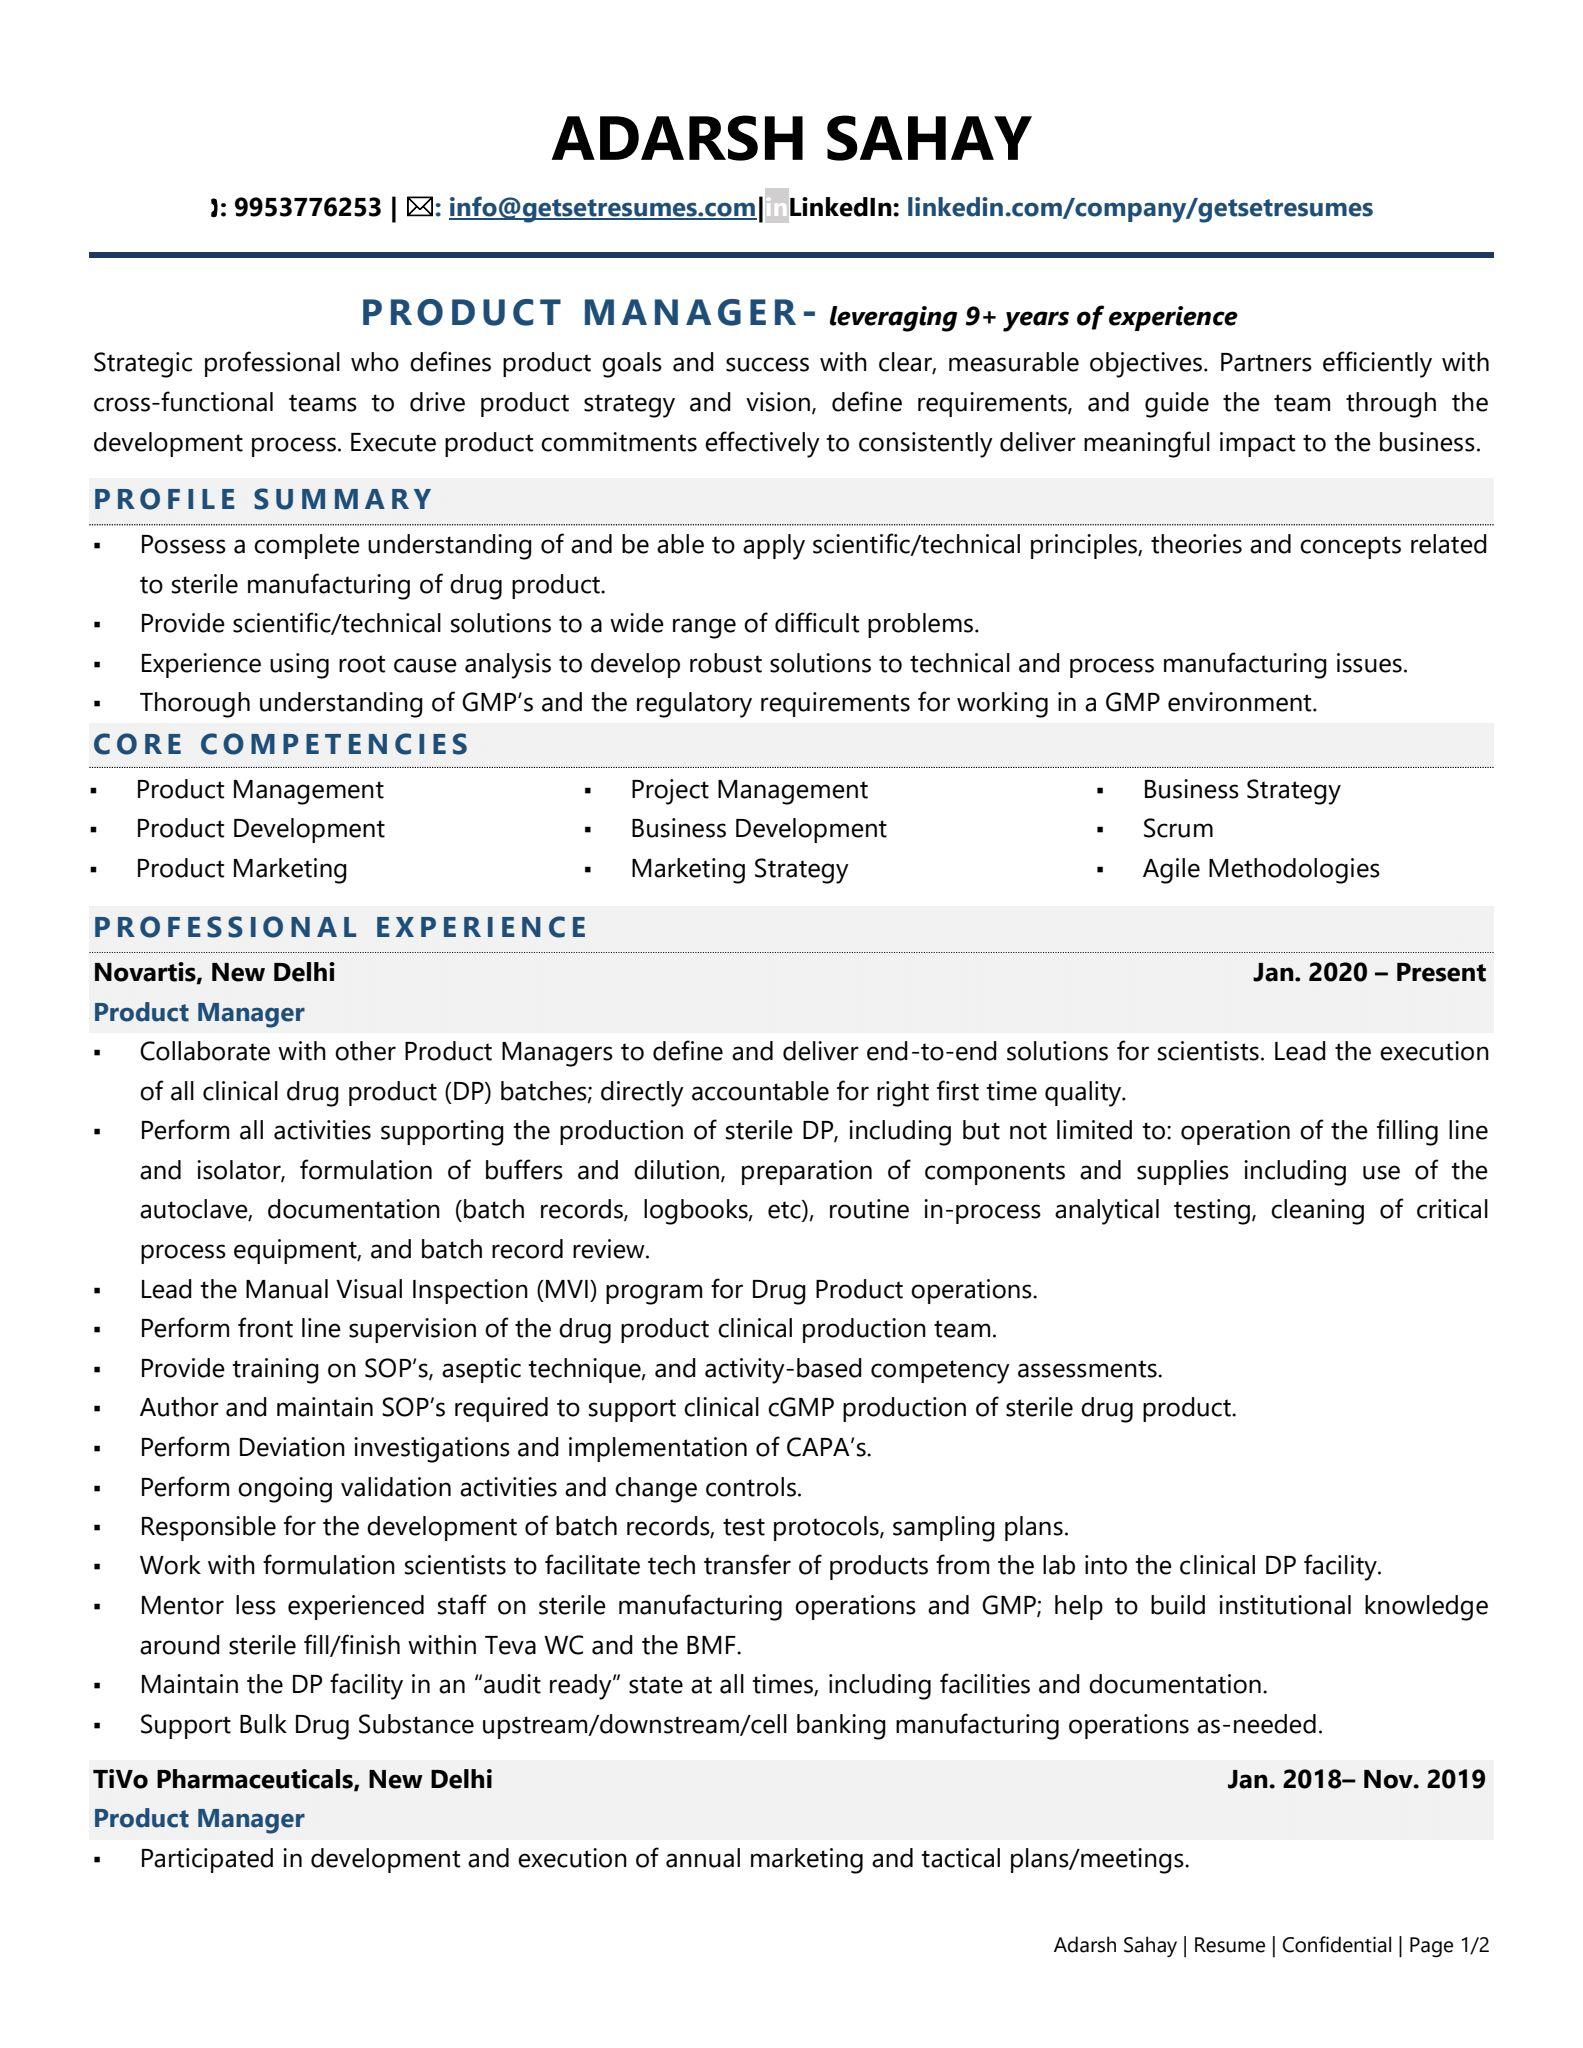 Pharma Product Manager - Resume Example & Template